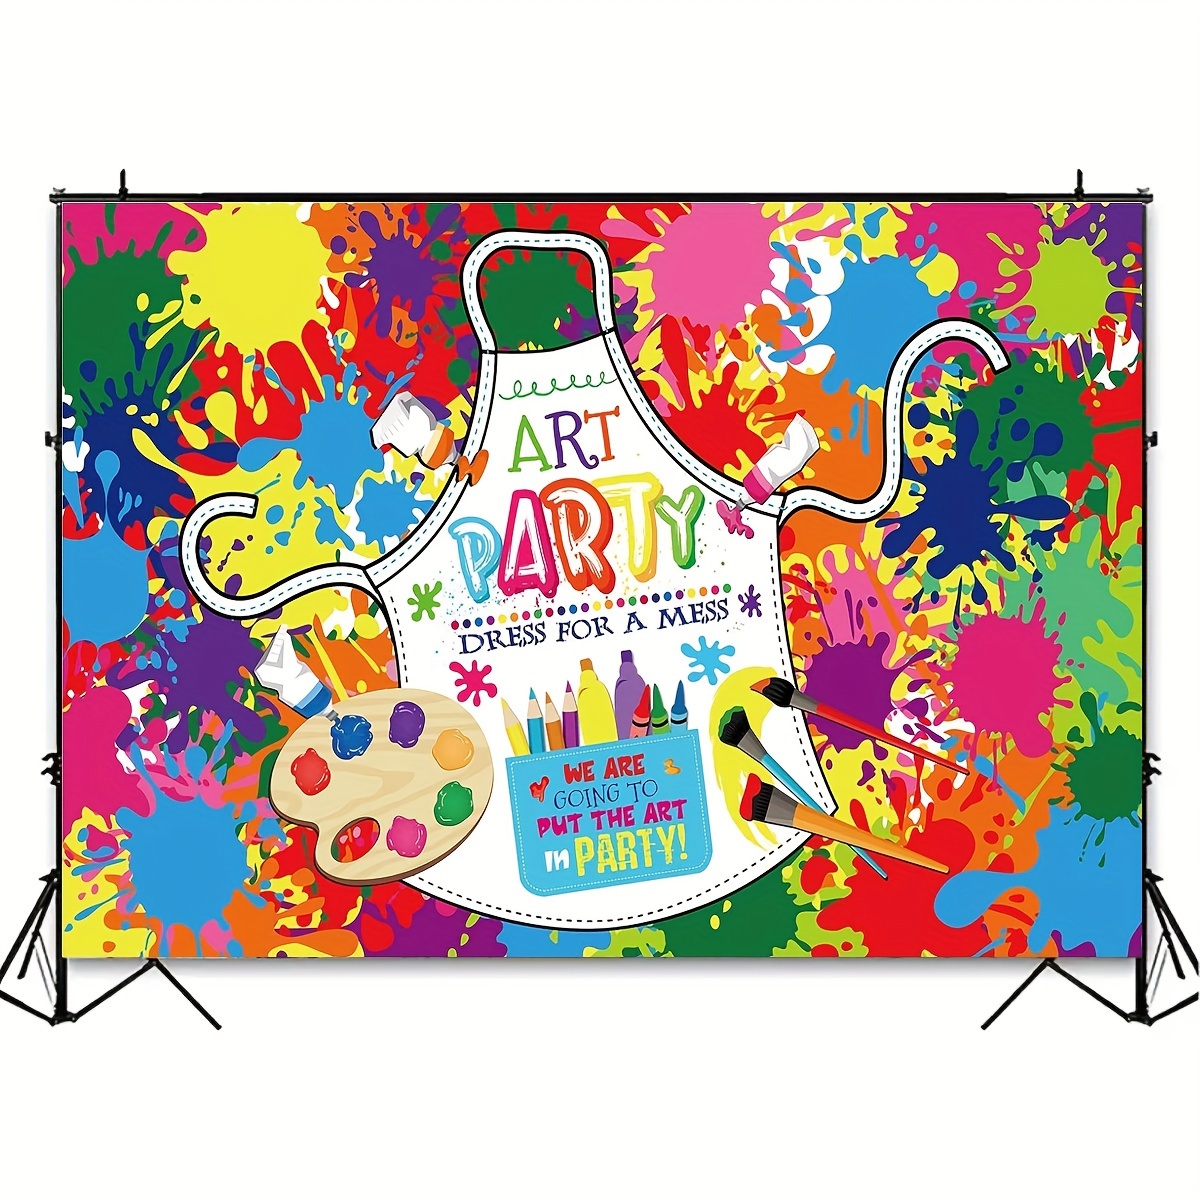 Painting Party Decorations, Painting Party Banner  Art party decorations,  Painting birthday party, Art birthday party